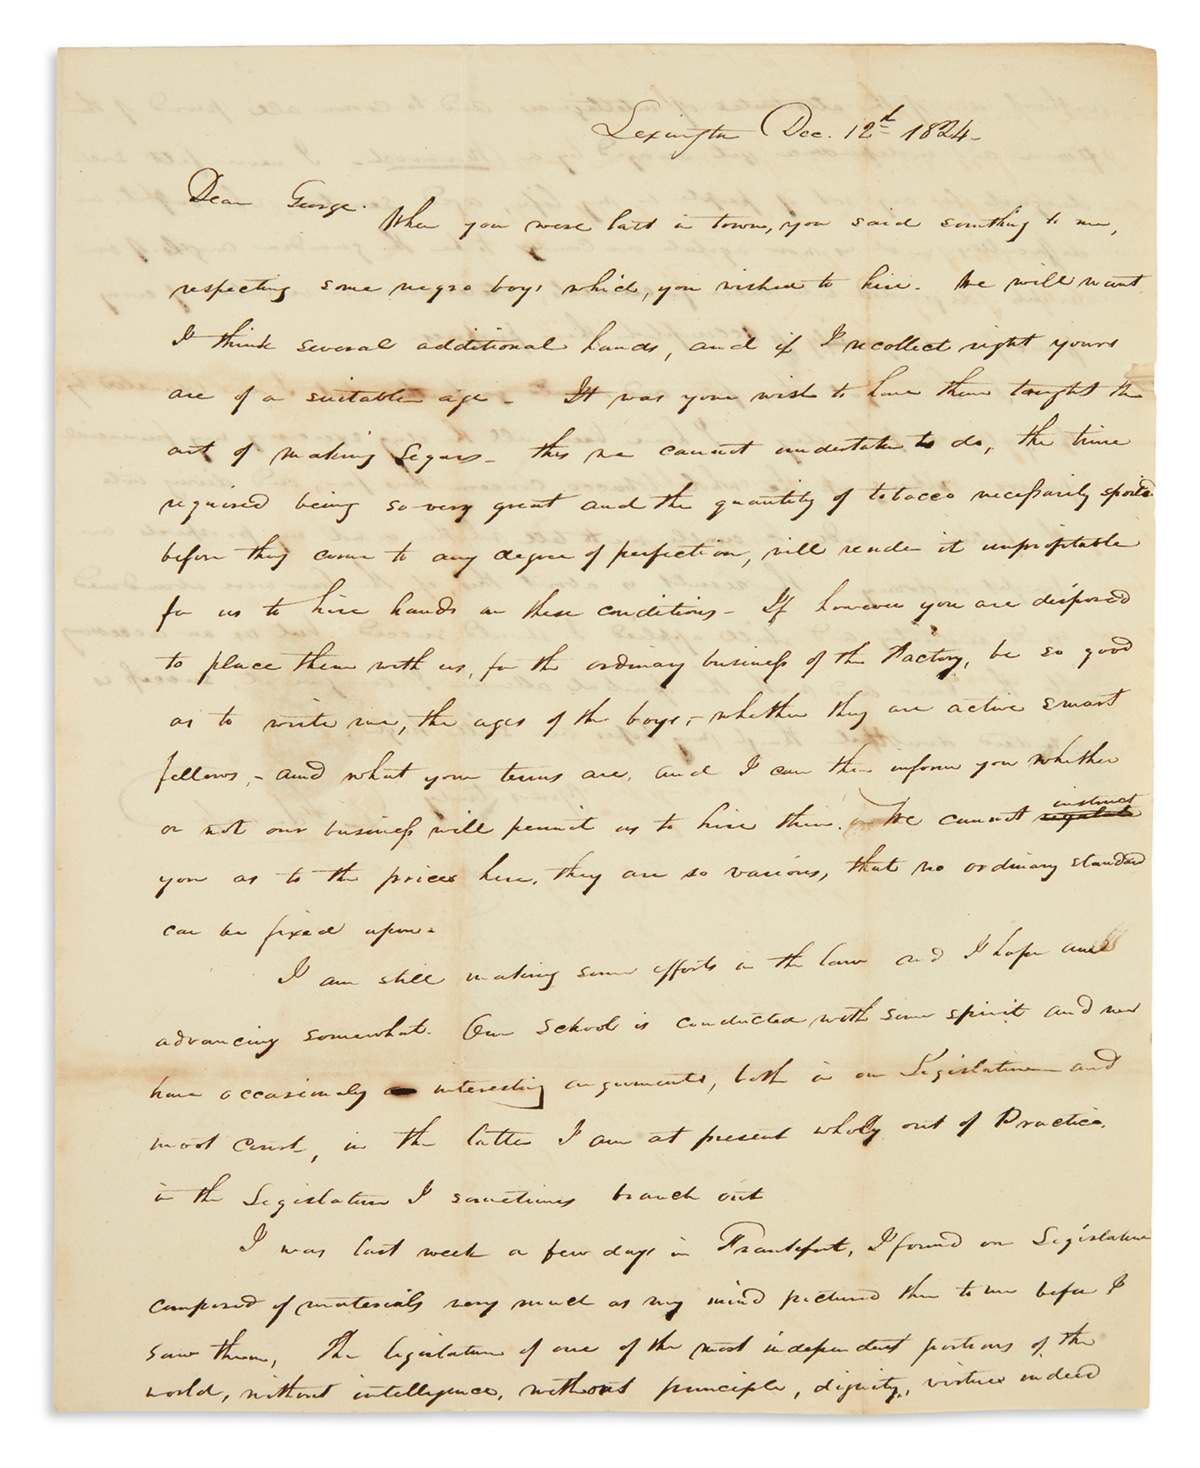 (SLAVERY AND ABOLITION.) Edwards, John. Letter discussing the hire and training of slaves to make cigars.